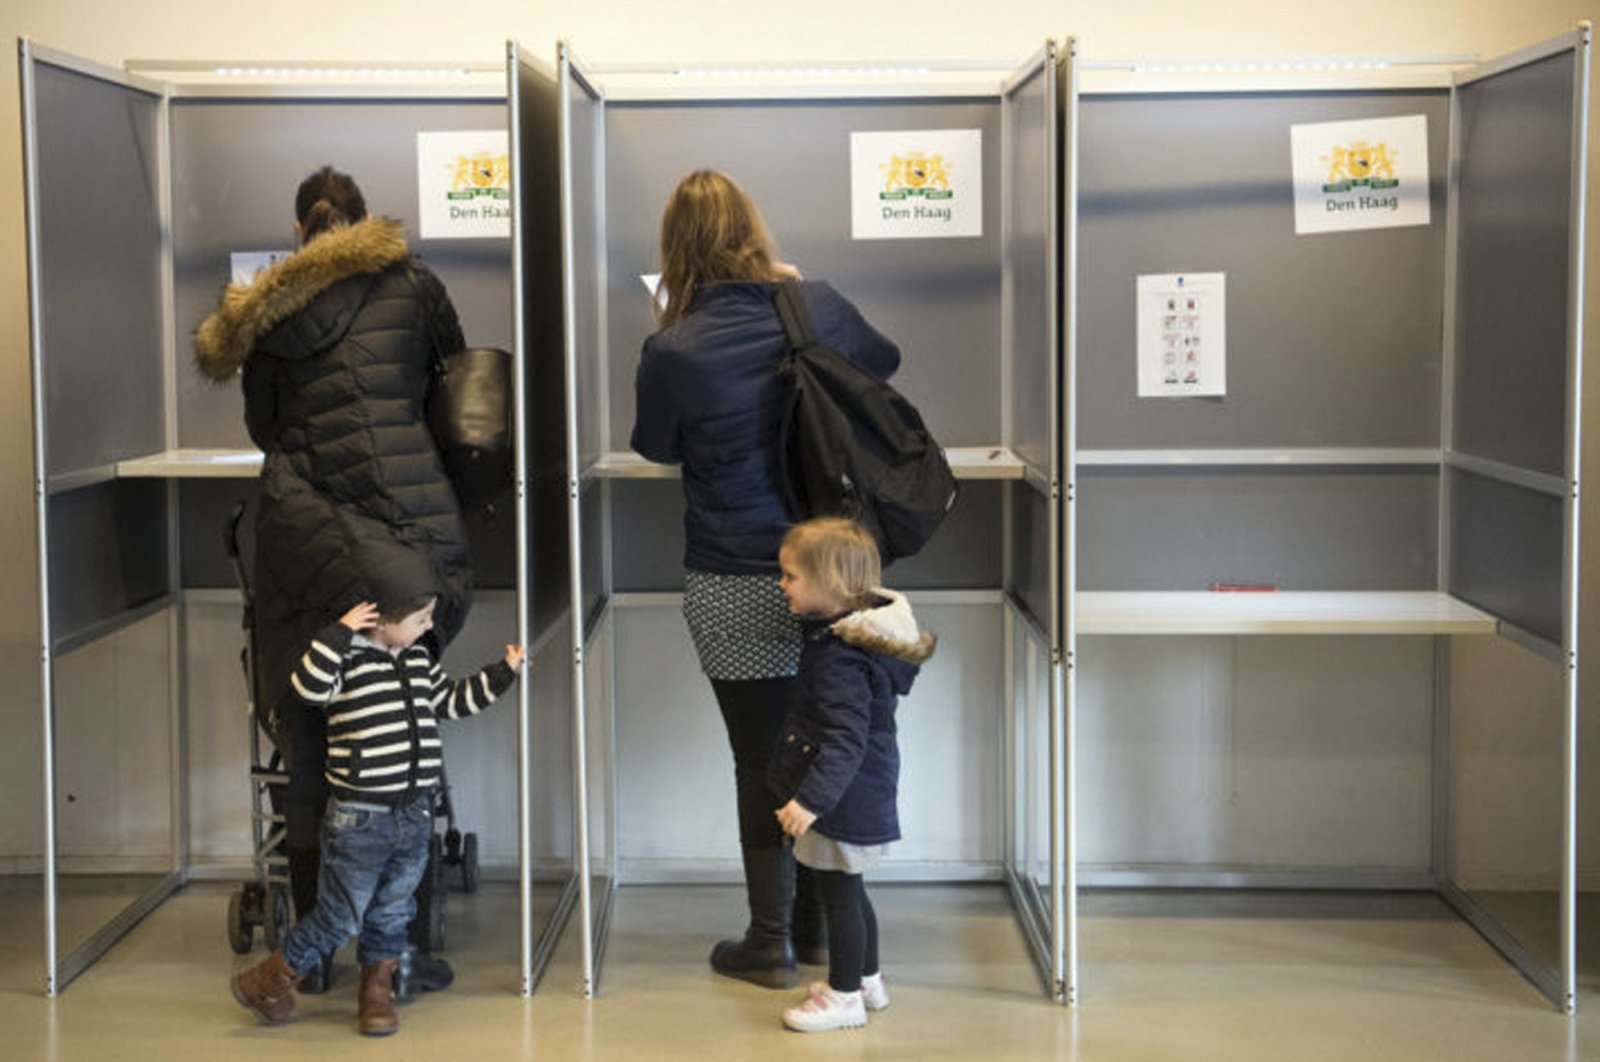 Children play as their mothers cast their votes in the Dutch general election, in The Hague, Netherlands, March 15, 2017. (Getty Images)